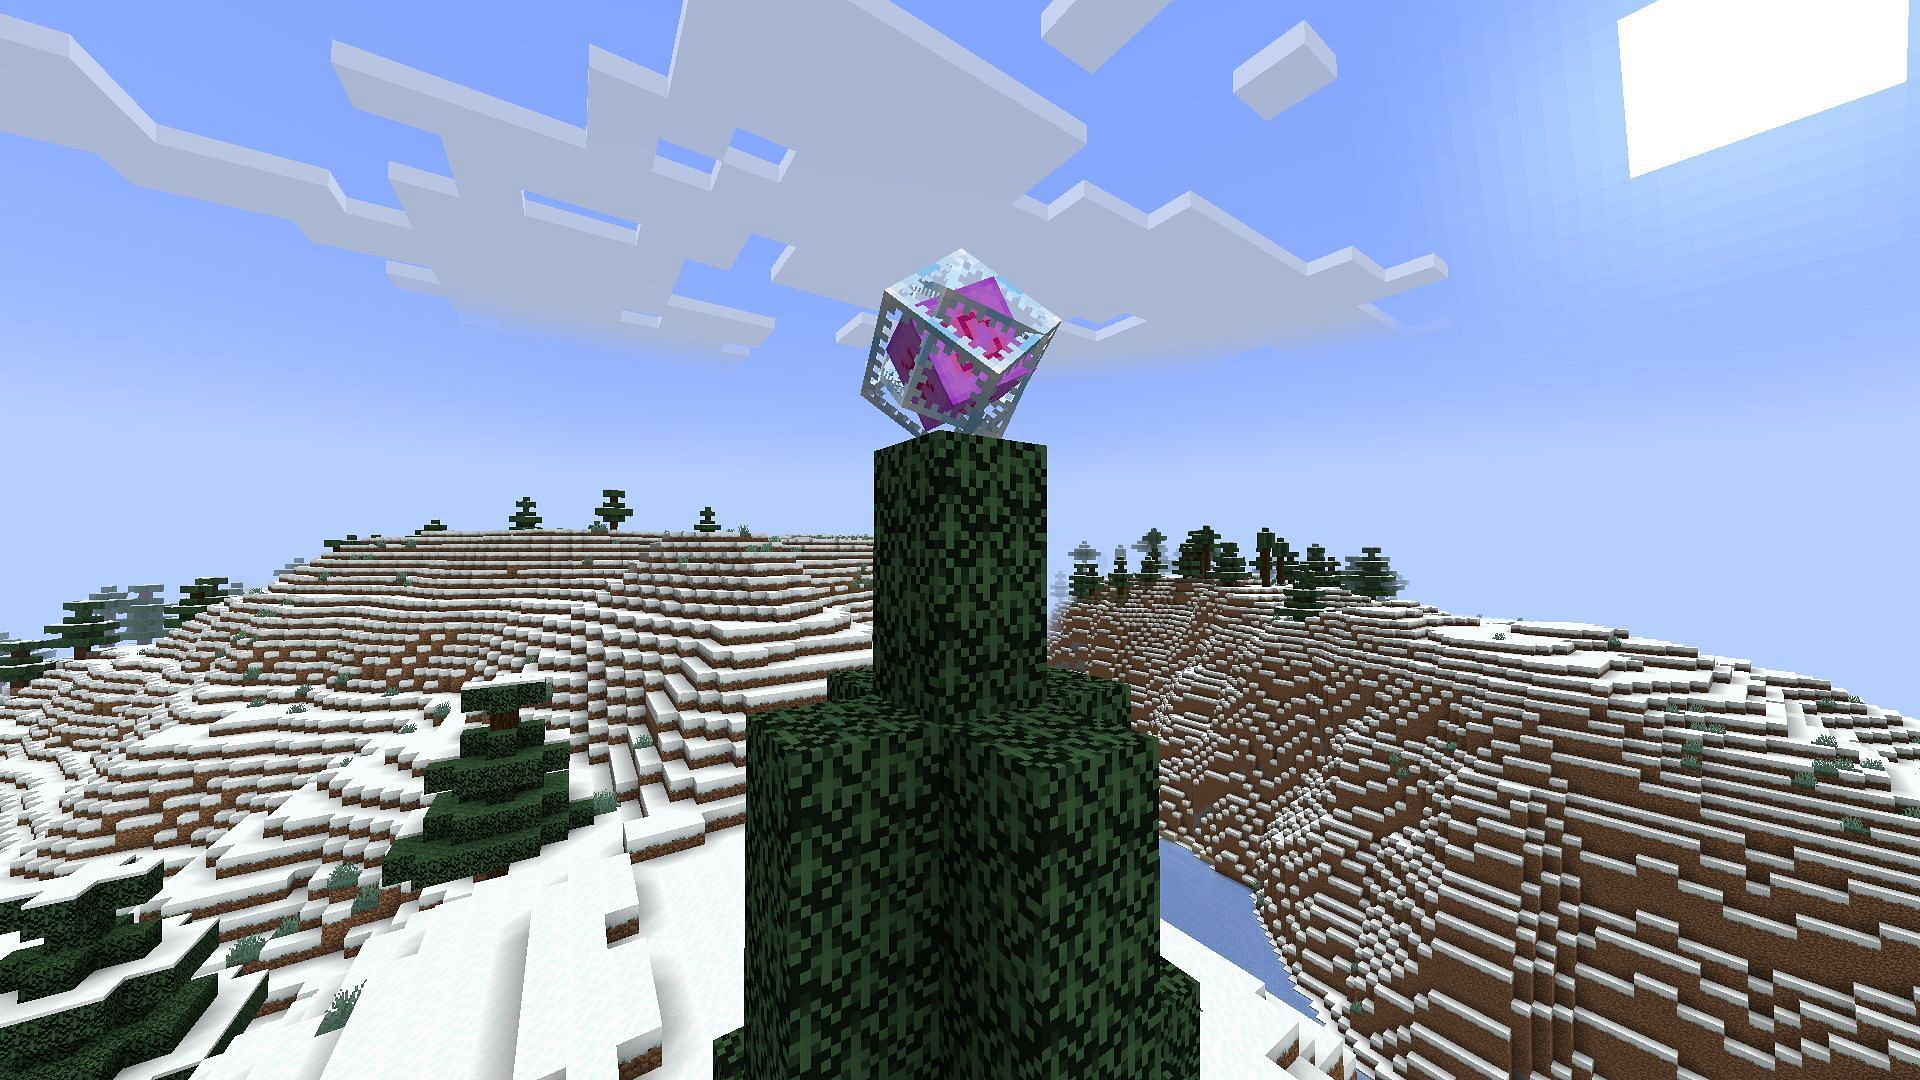 End crystal as a star on top of the Christmas tree in Minecraft (Image via Mojang)